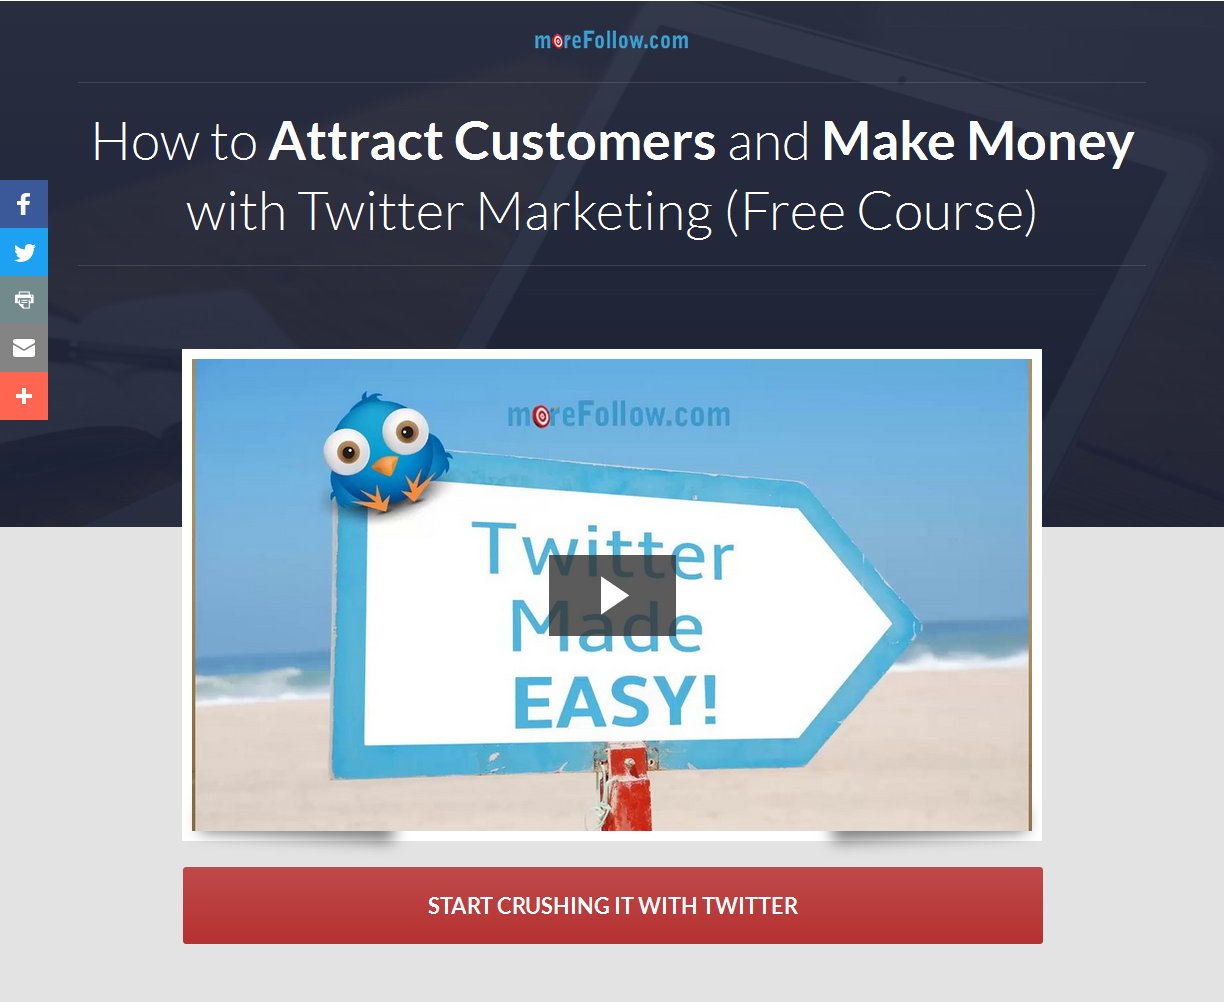 twitter-made-easy-signup-example